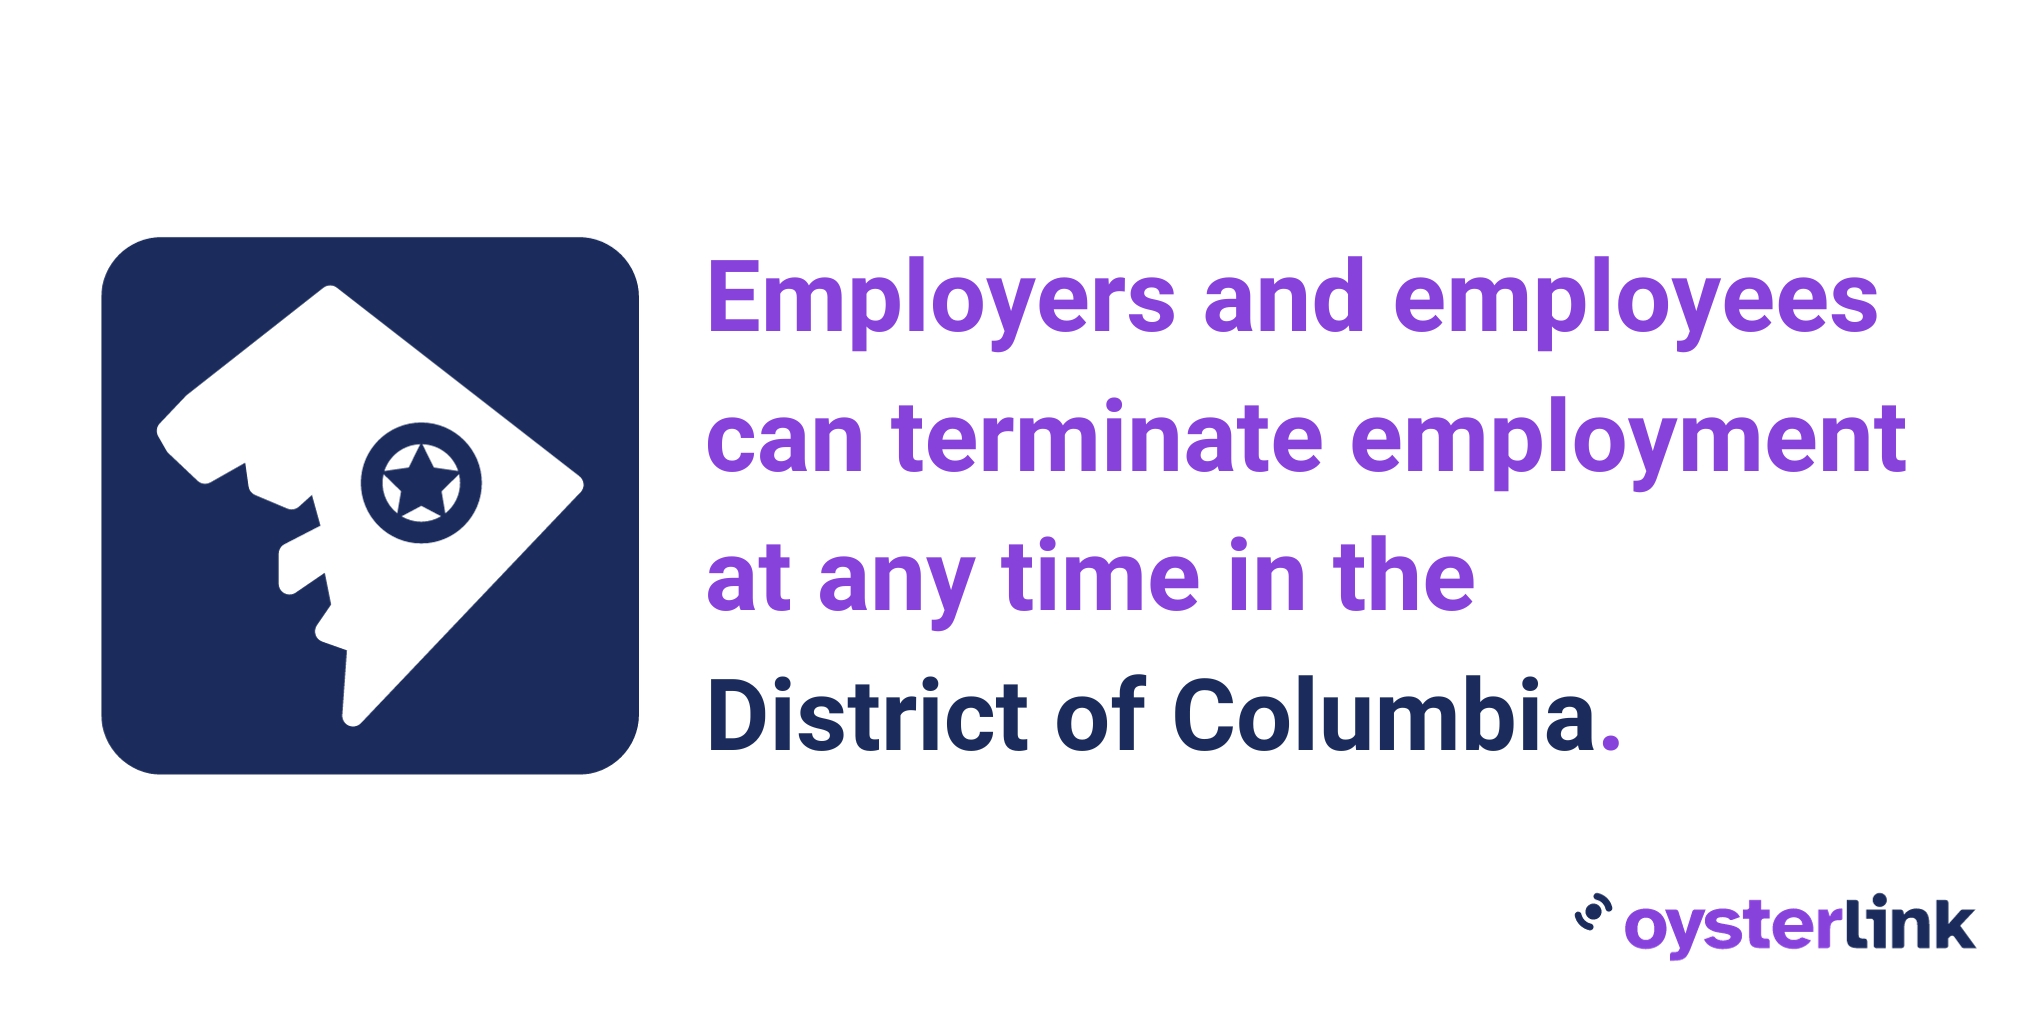 The District of Columbia is an at-will employment state.